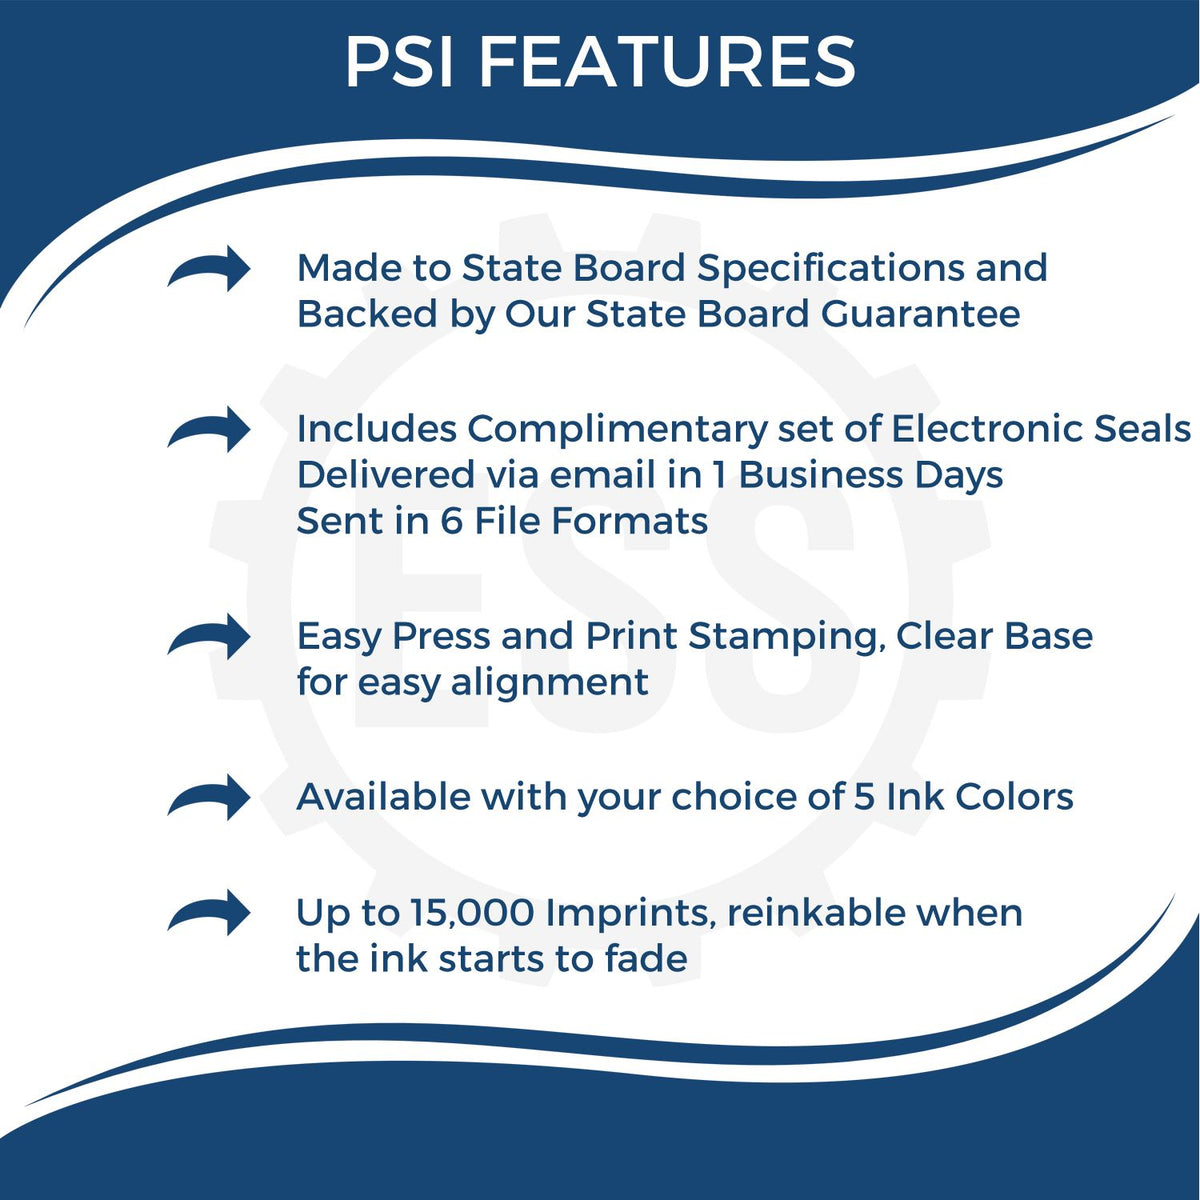 A picture of an infographic highlighting the selling points for the PSI Mississippi Notary Stamp